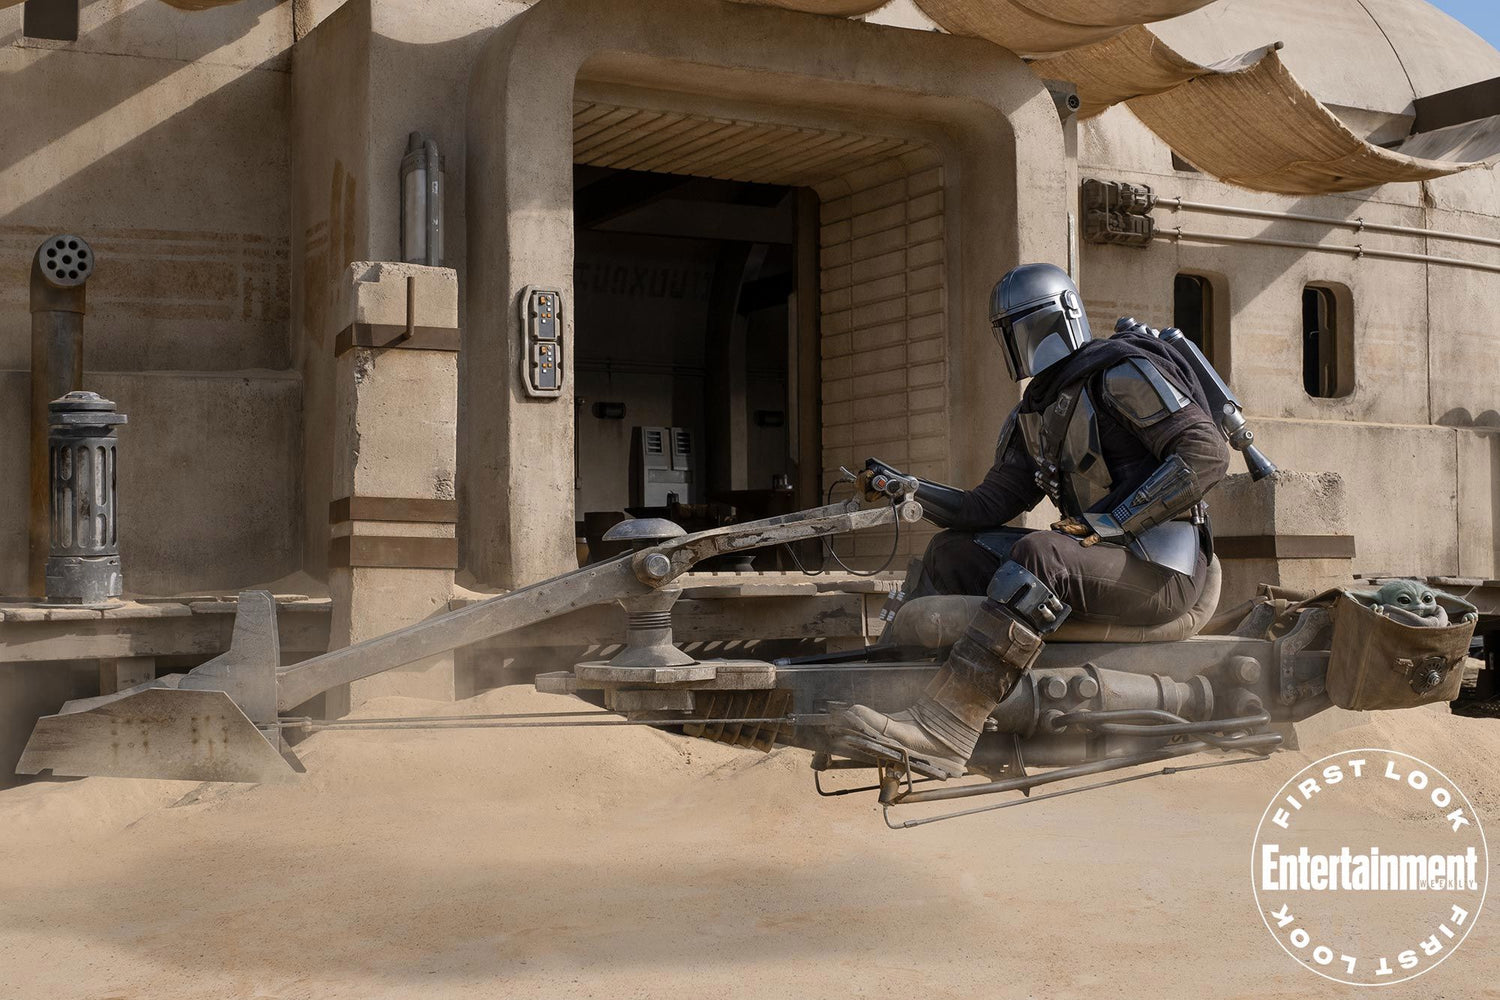 Details and photos surface for Season 2 of The Mandalorian